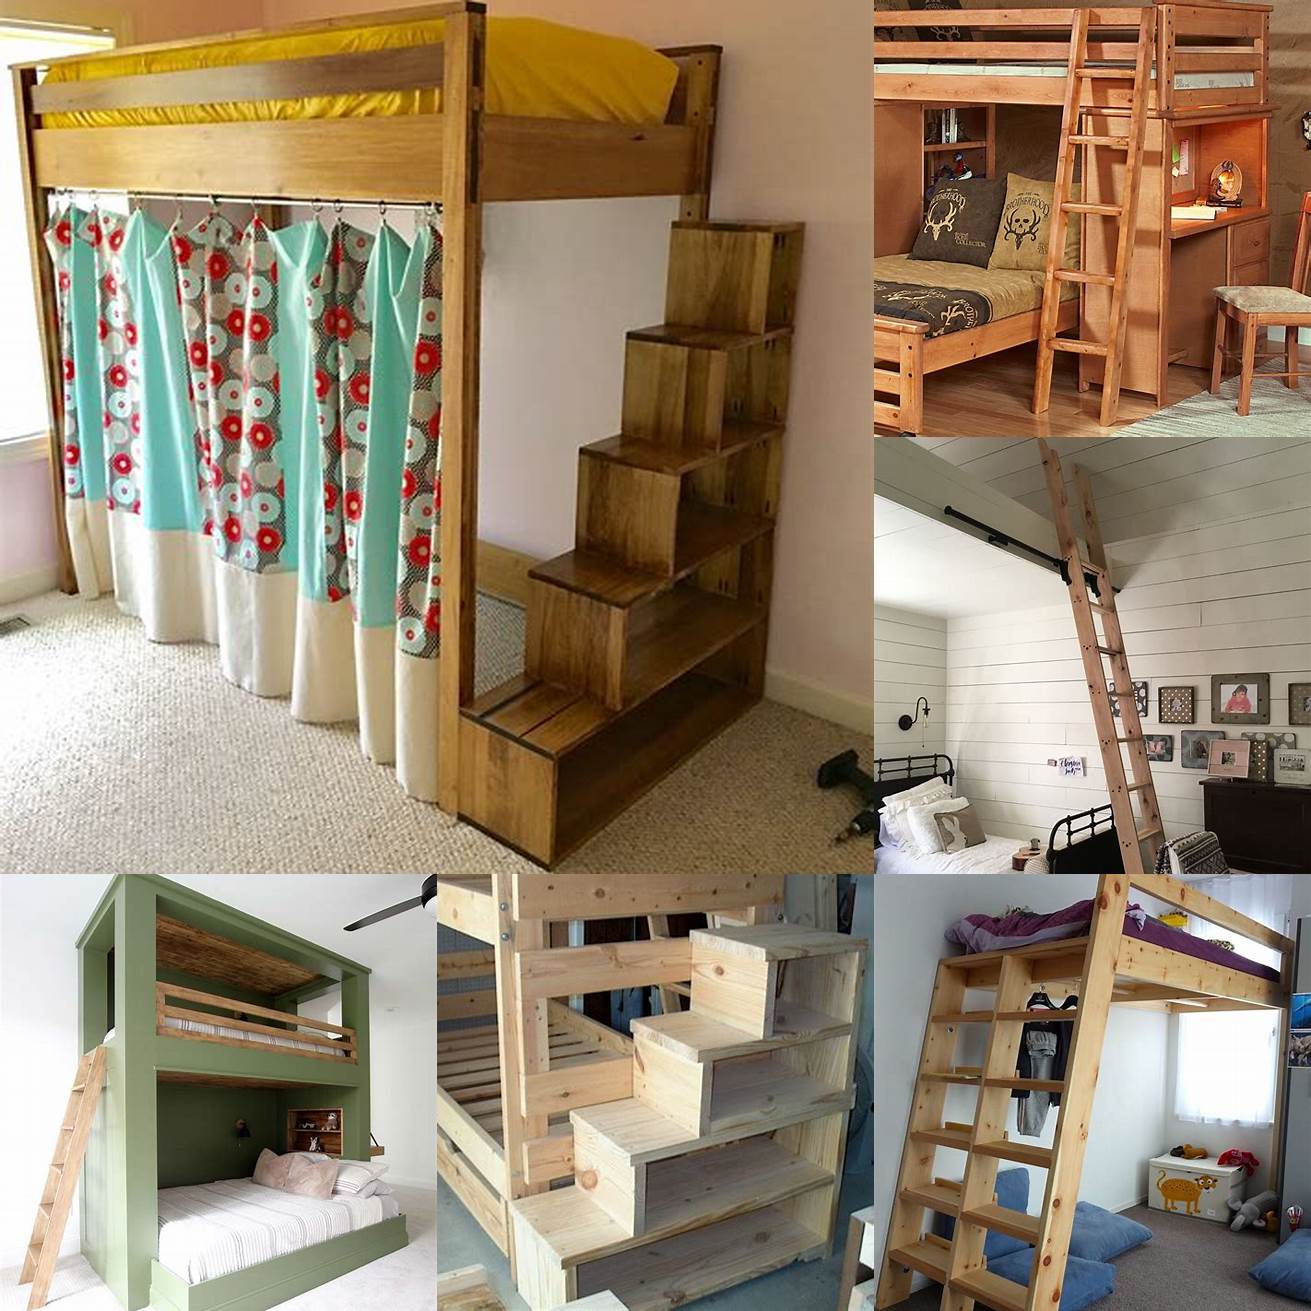 A simple basic loft bed with a ladder for easy access